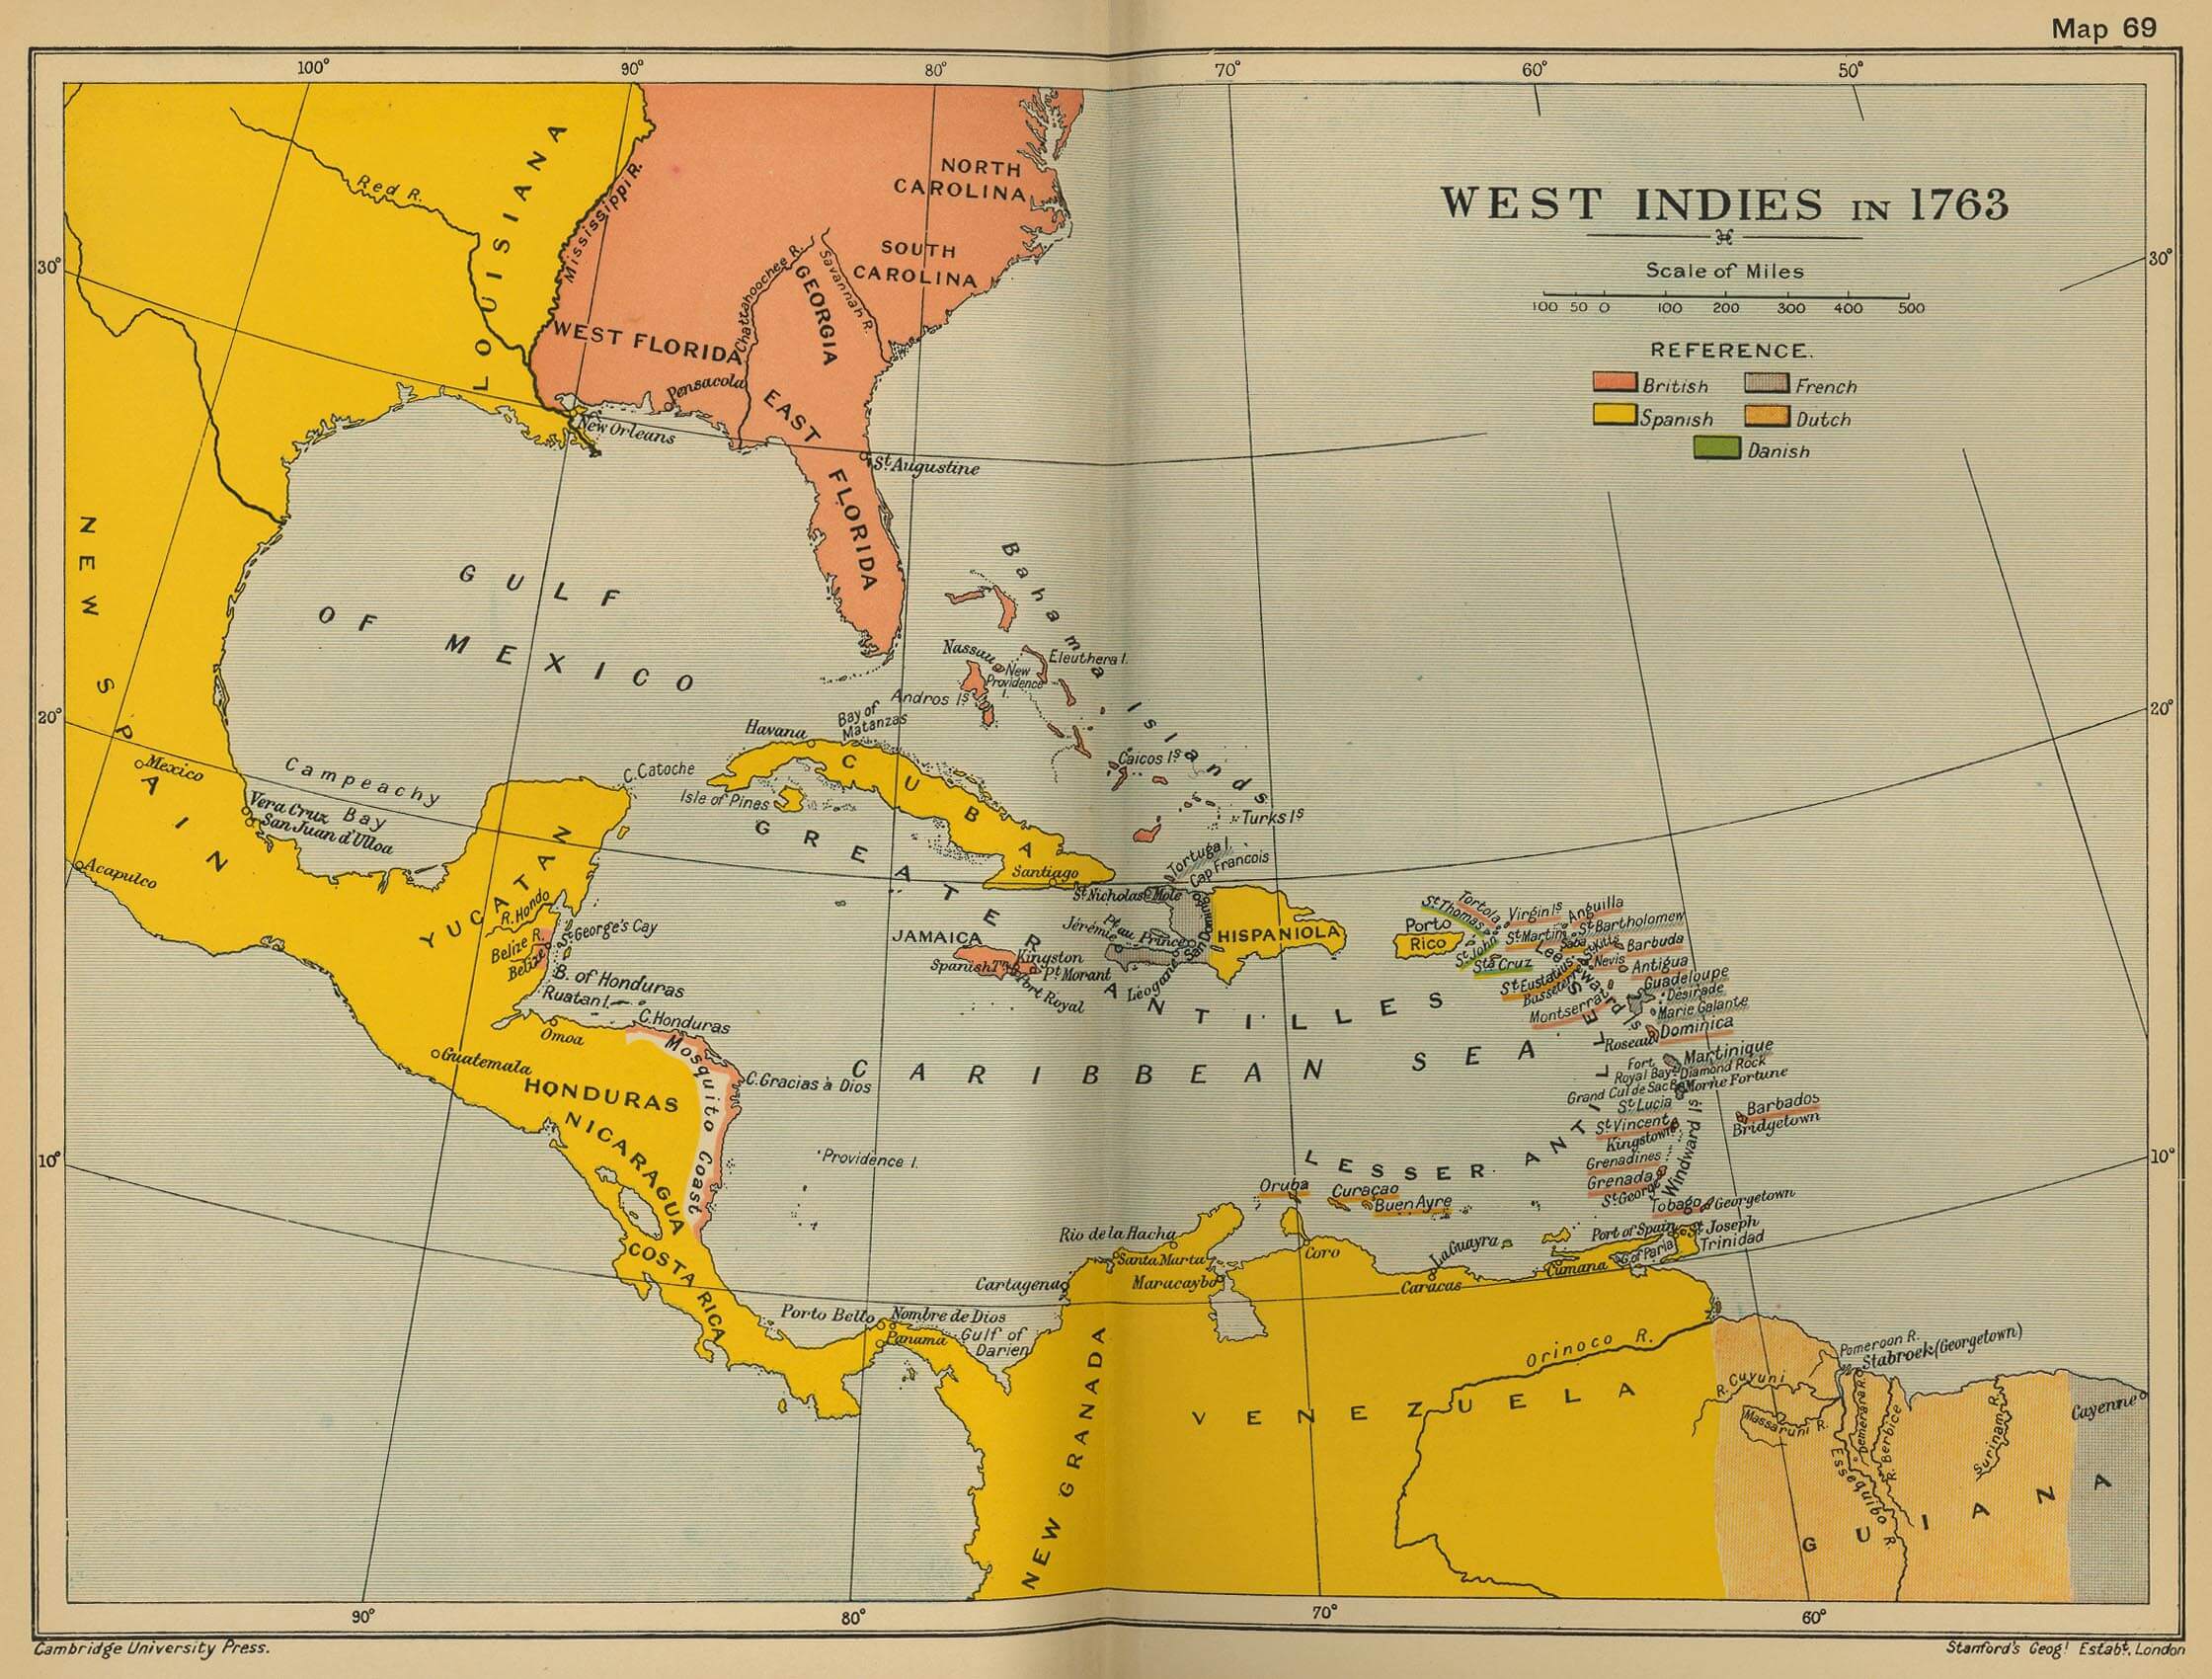 West Indies Central America 1763